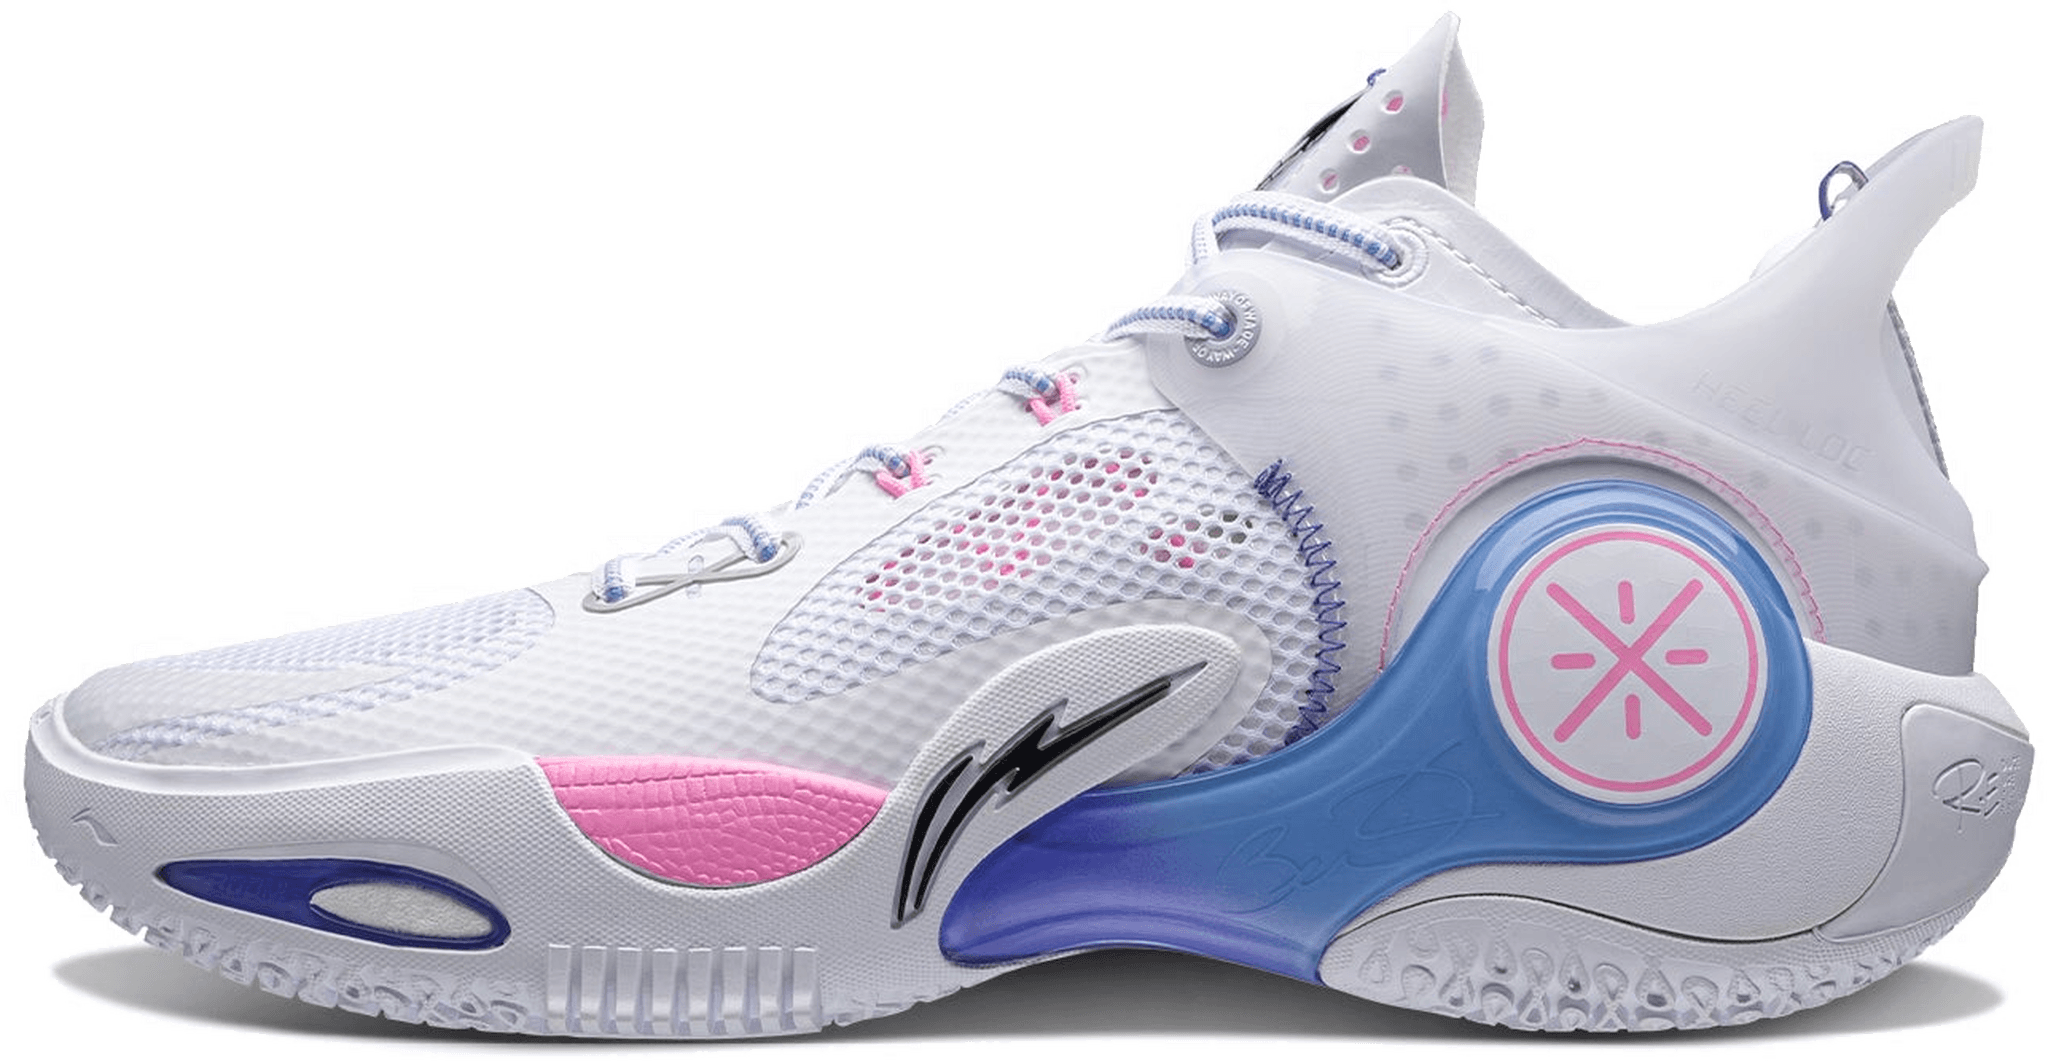 Li-Ning Wade Fission 8 - Review, Deals, Pics of 5 Colorways